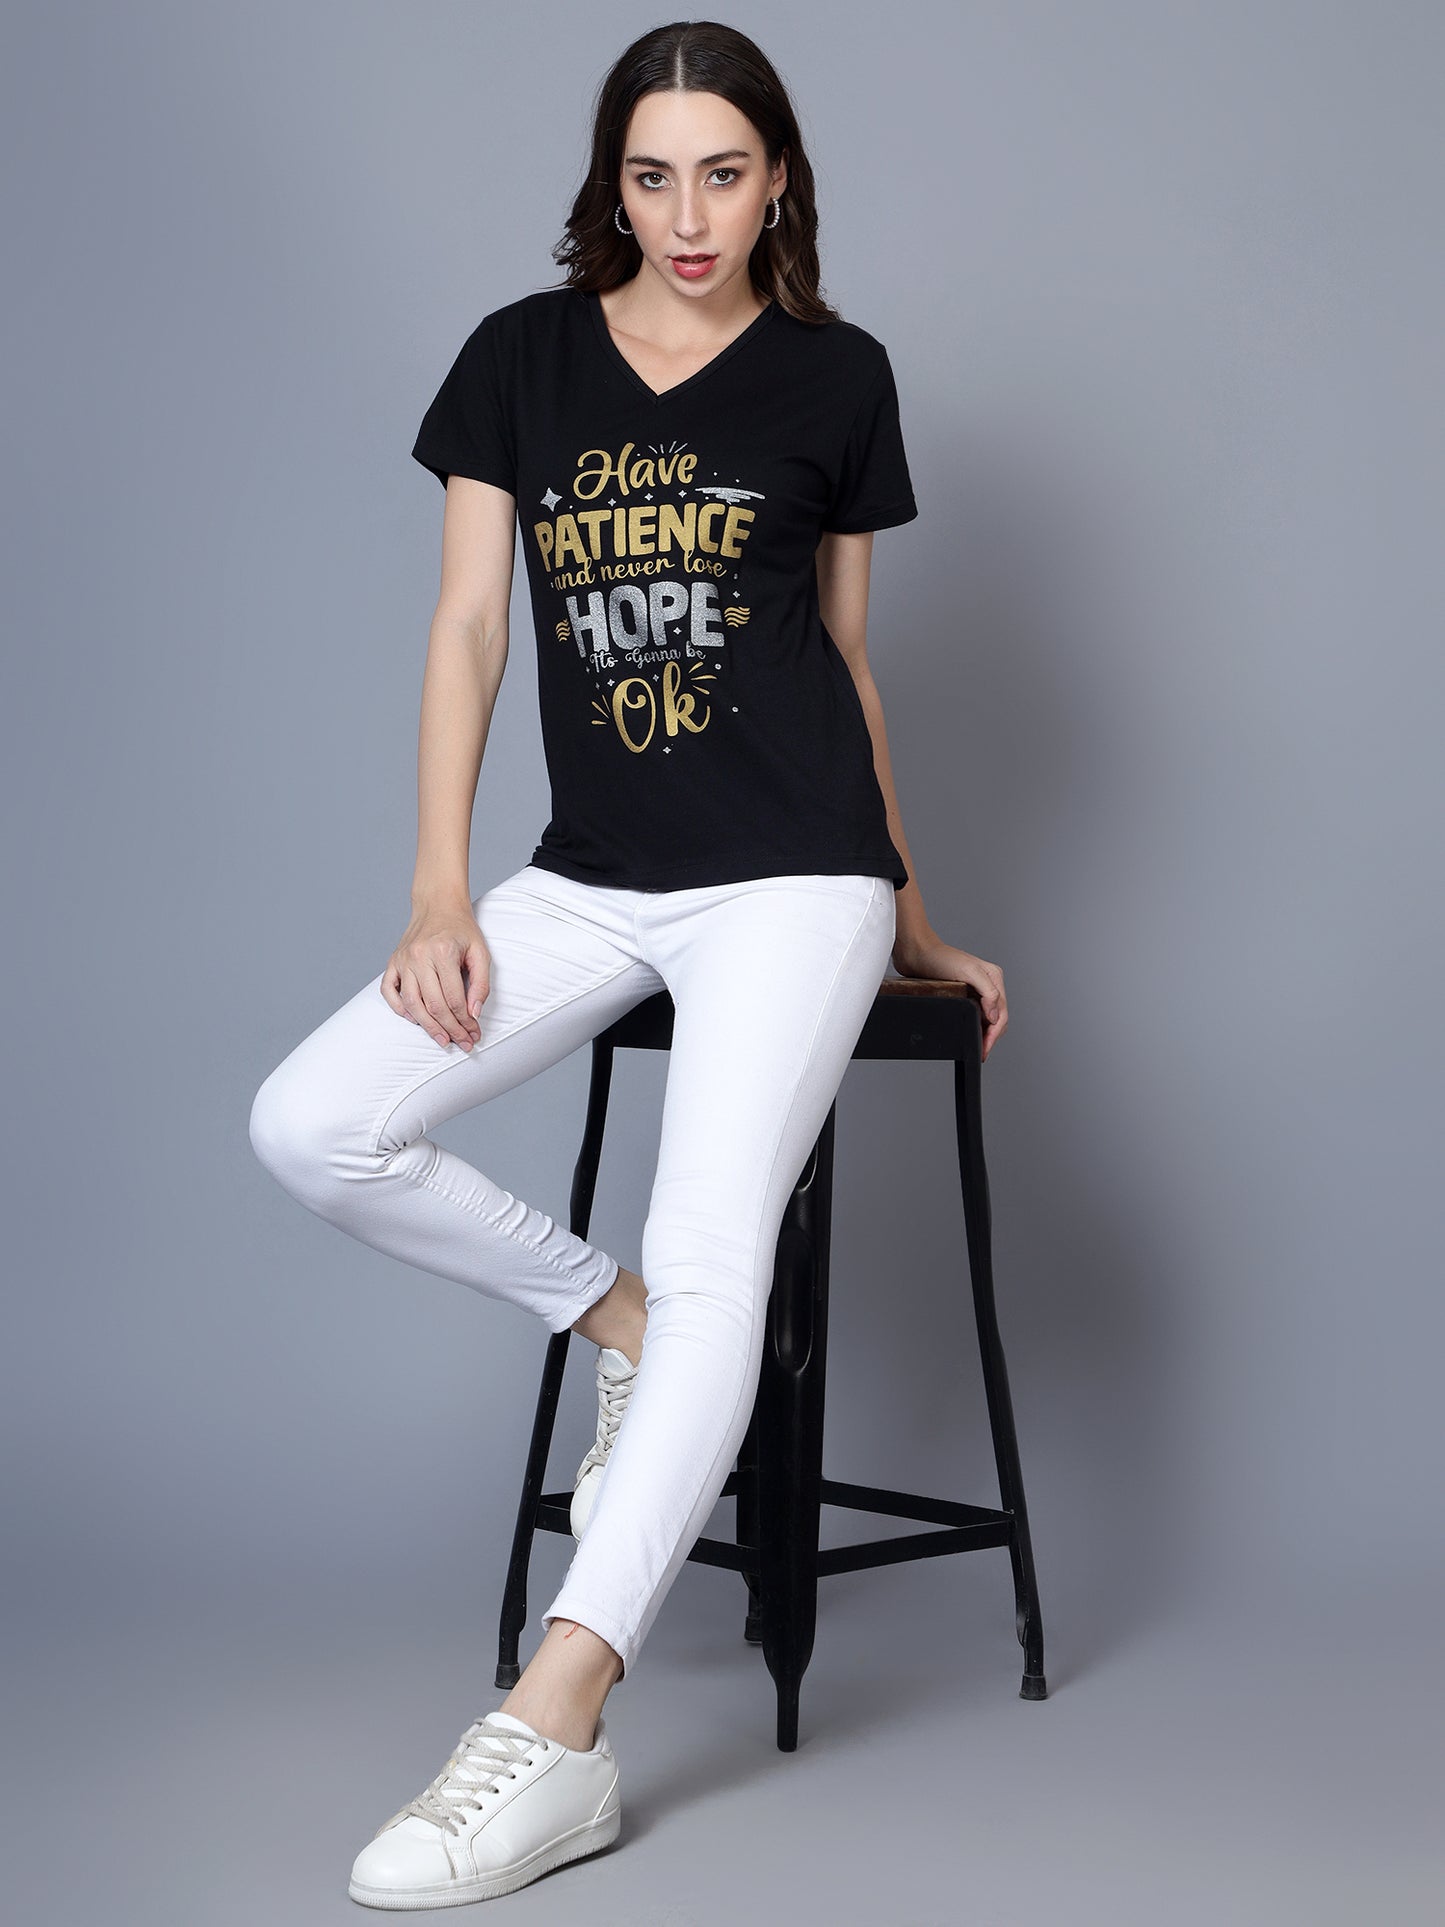 Women's Cotton V Neck Typography Printed Half Sleeve T-Shirt (Pack of 2)